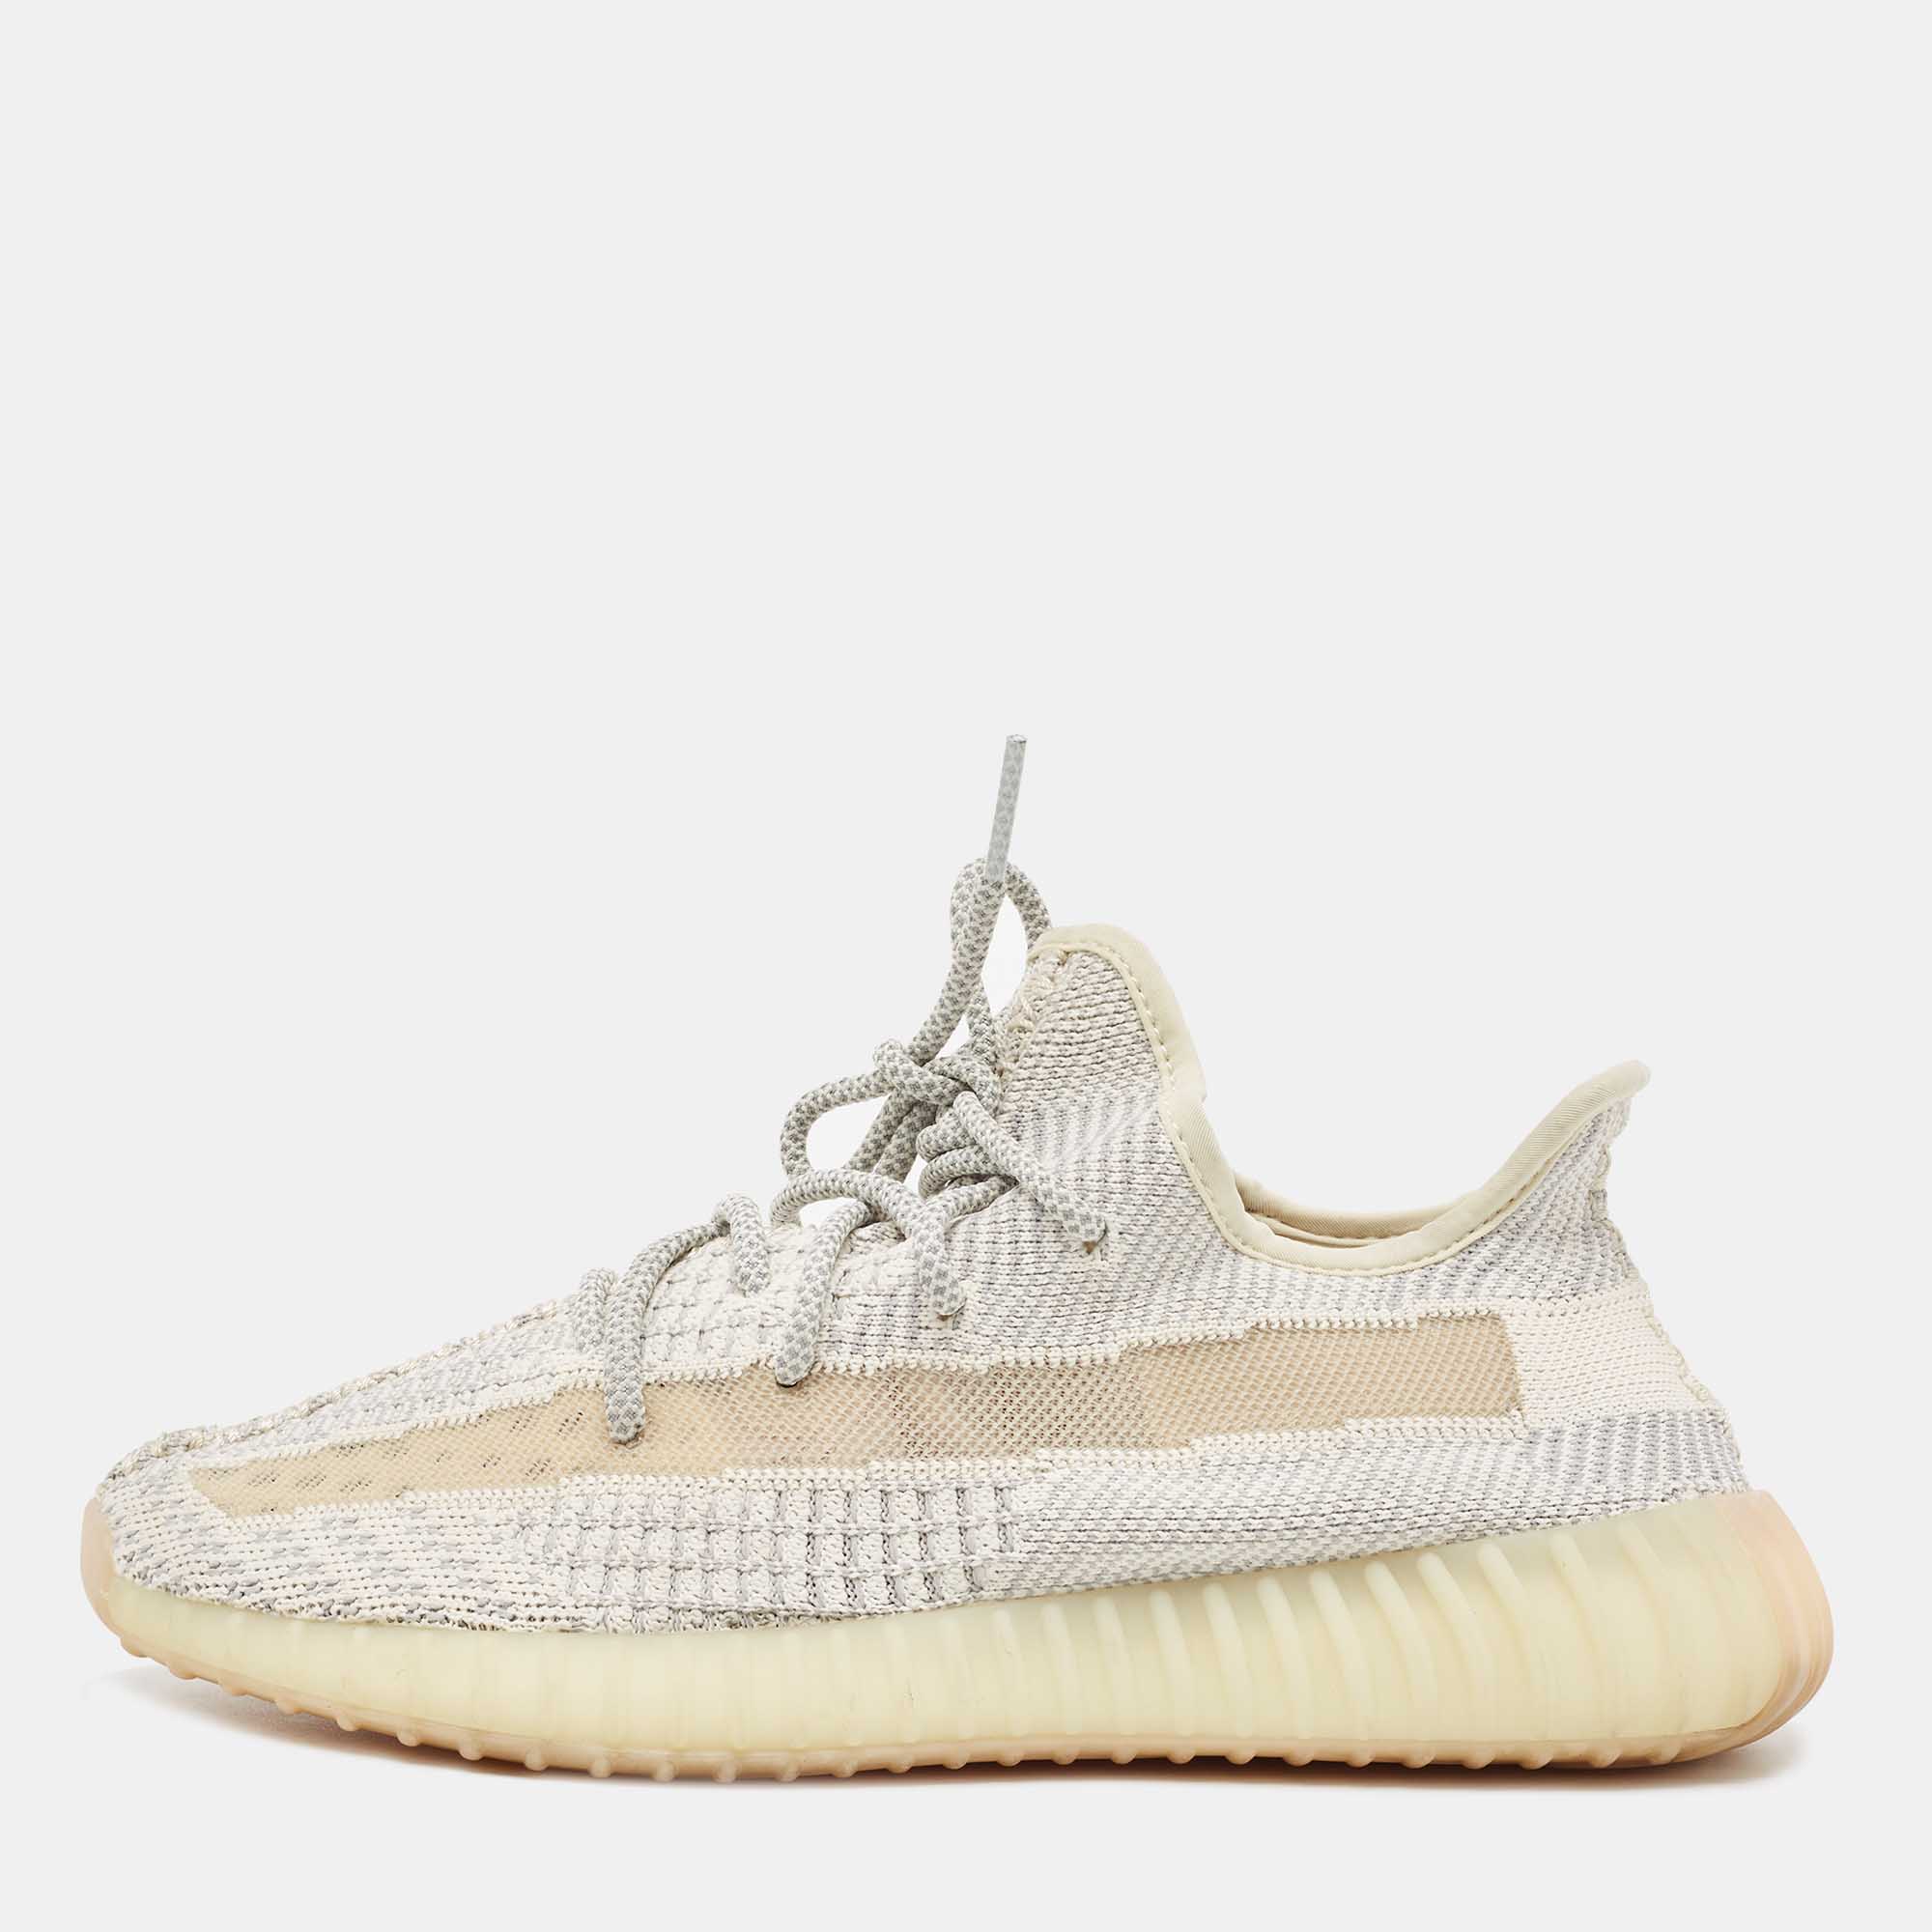 

Yeezy x Adidas Two Tone Knit Fabric Boost 350 V2 Lundmark Sneakers Size  1/3, Grey